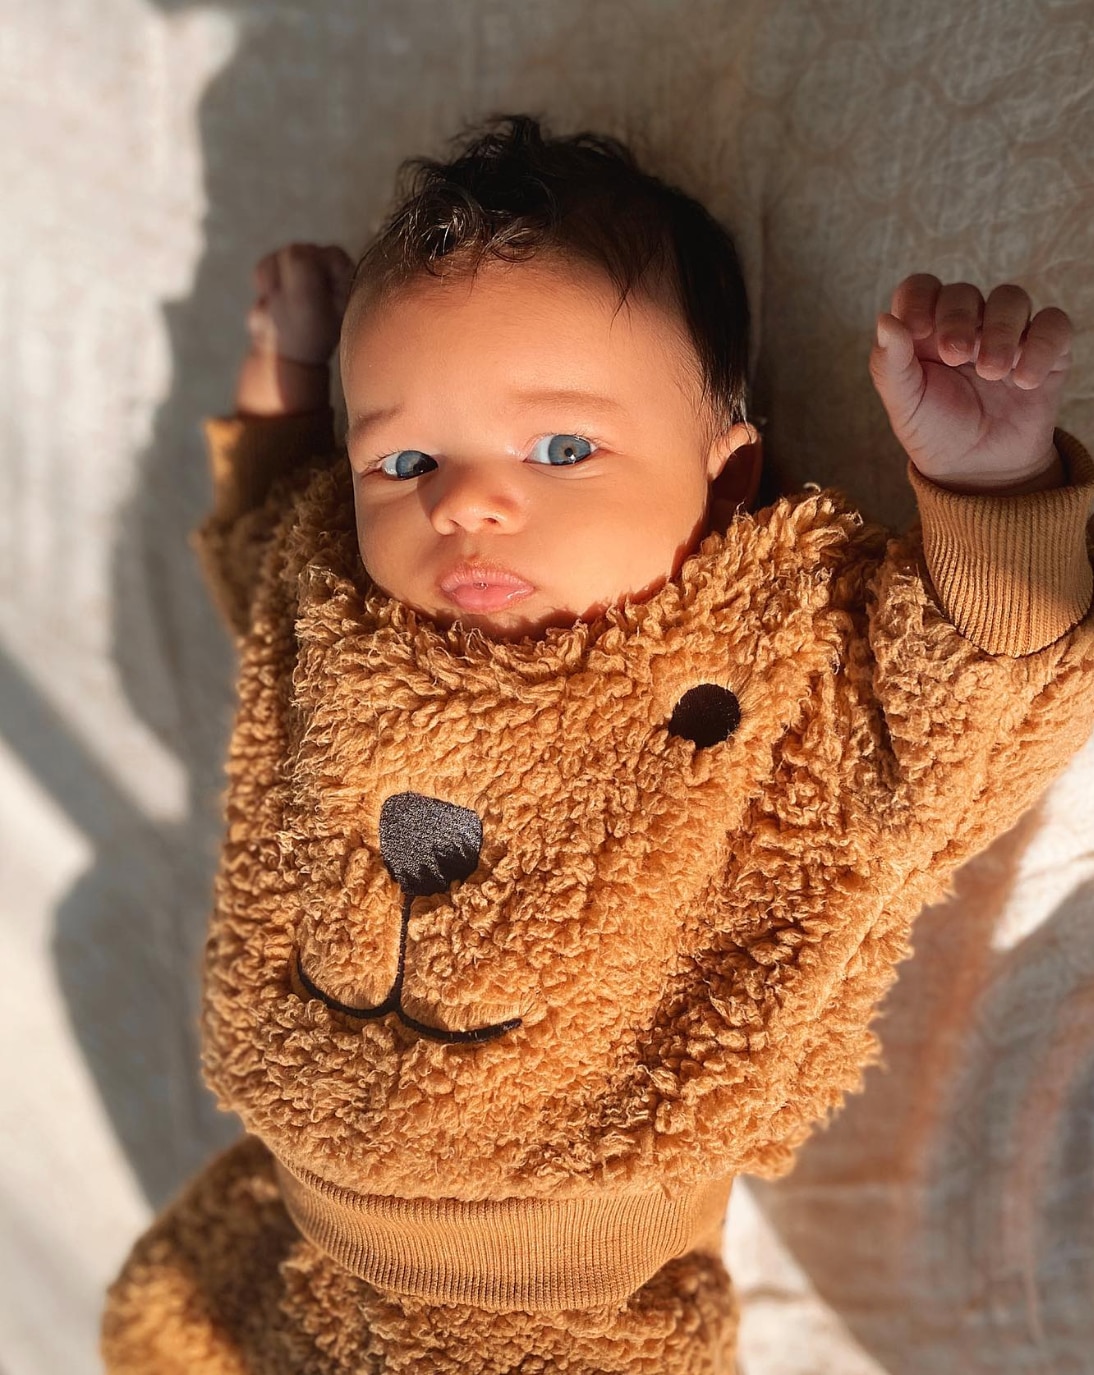 A baby boy in a brown teddy outfit is lying down stretching out.